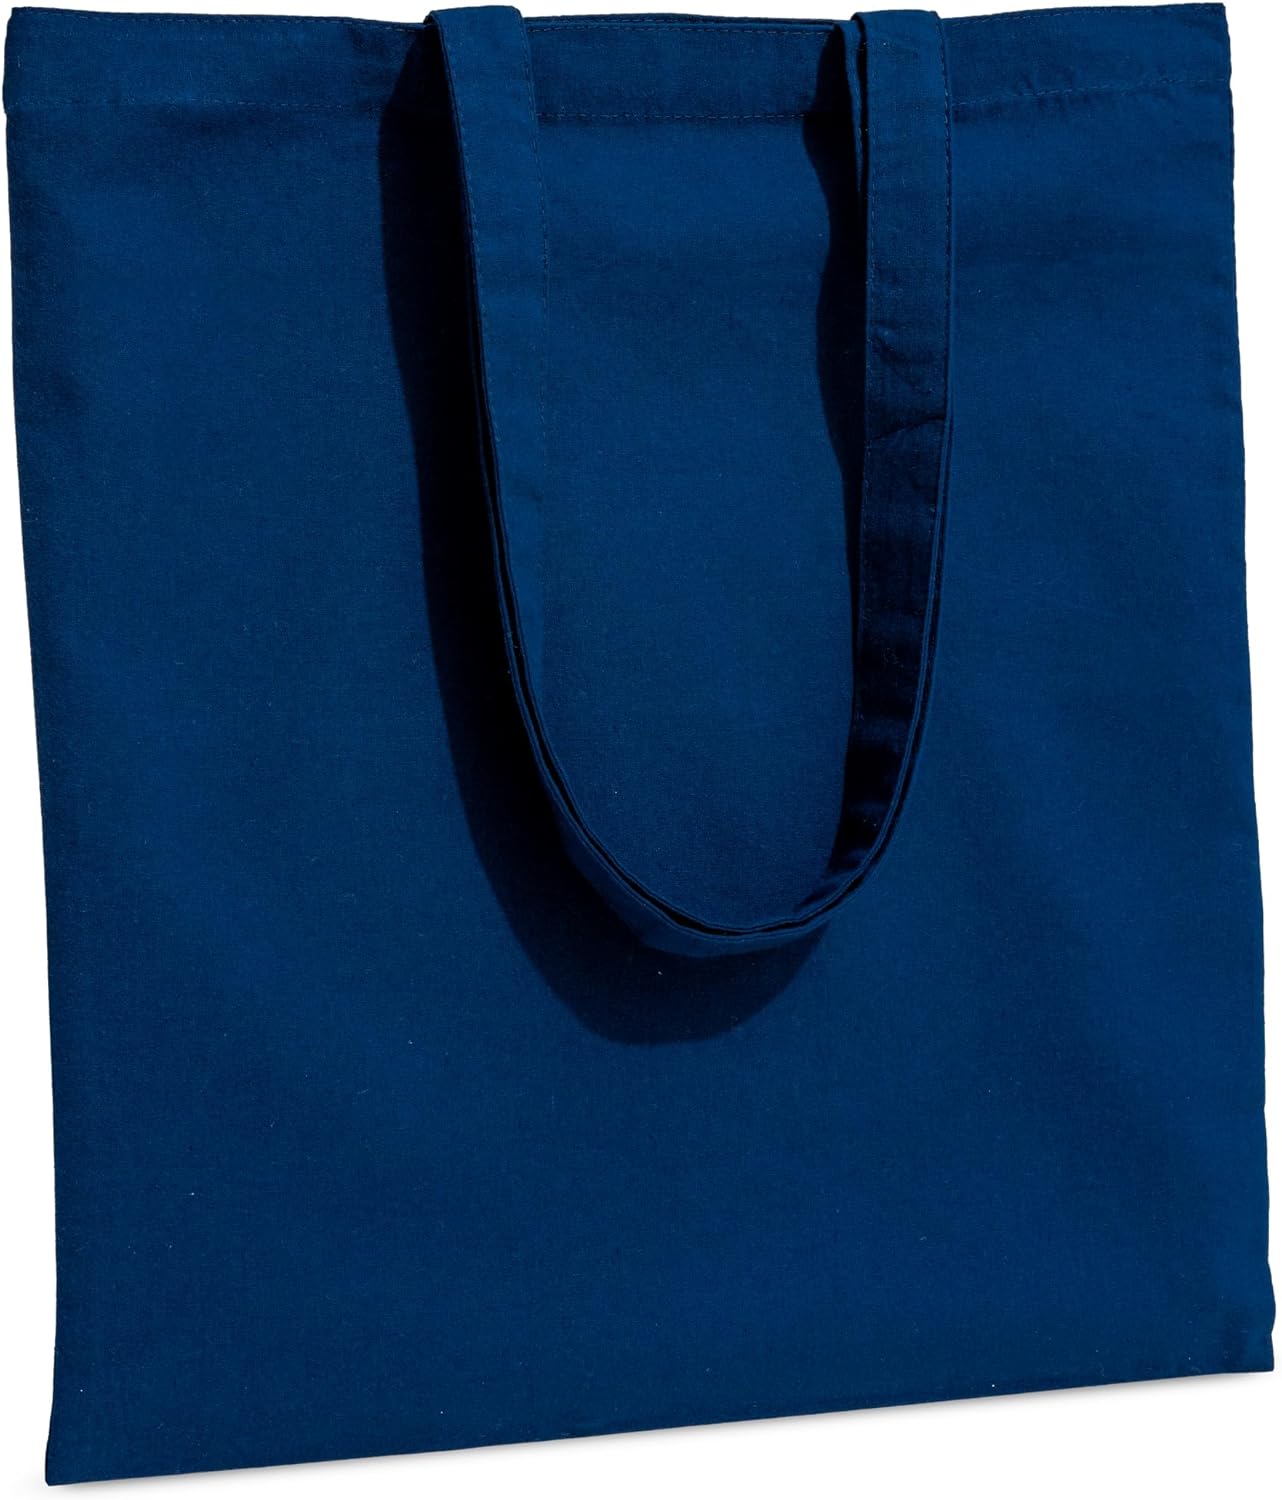 |Not Made In China| Reusable Grocery Bag, Eco-Friendly Canvas Tote, Shopping Bag, Light-Weight Organic Cotton